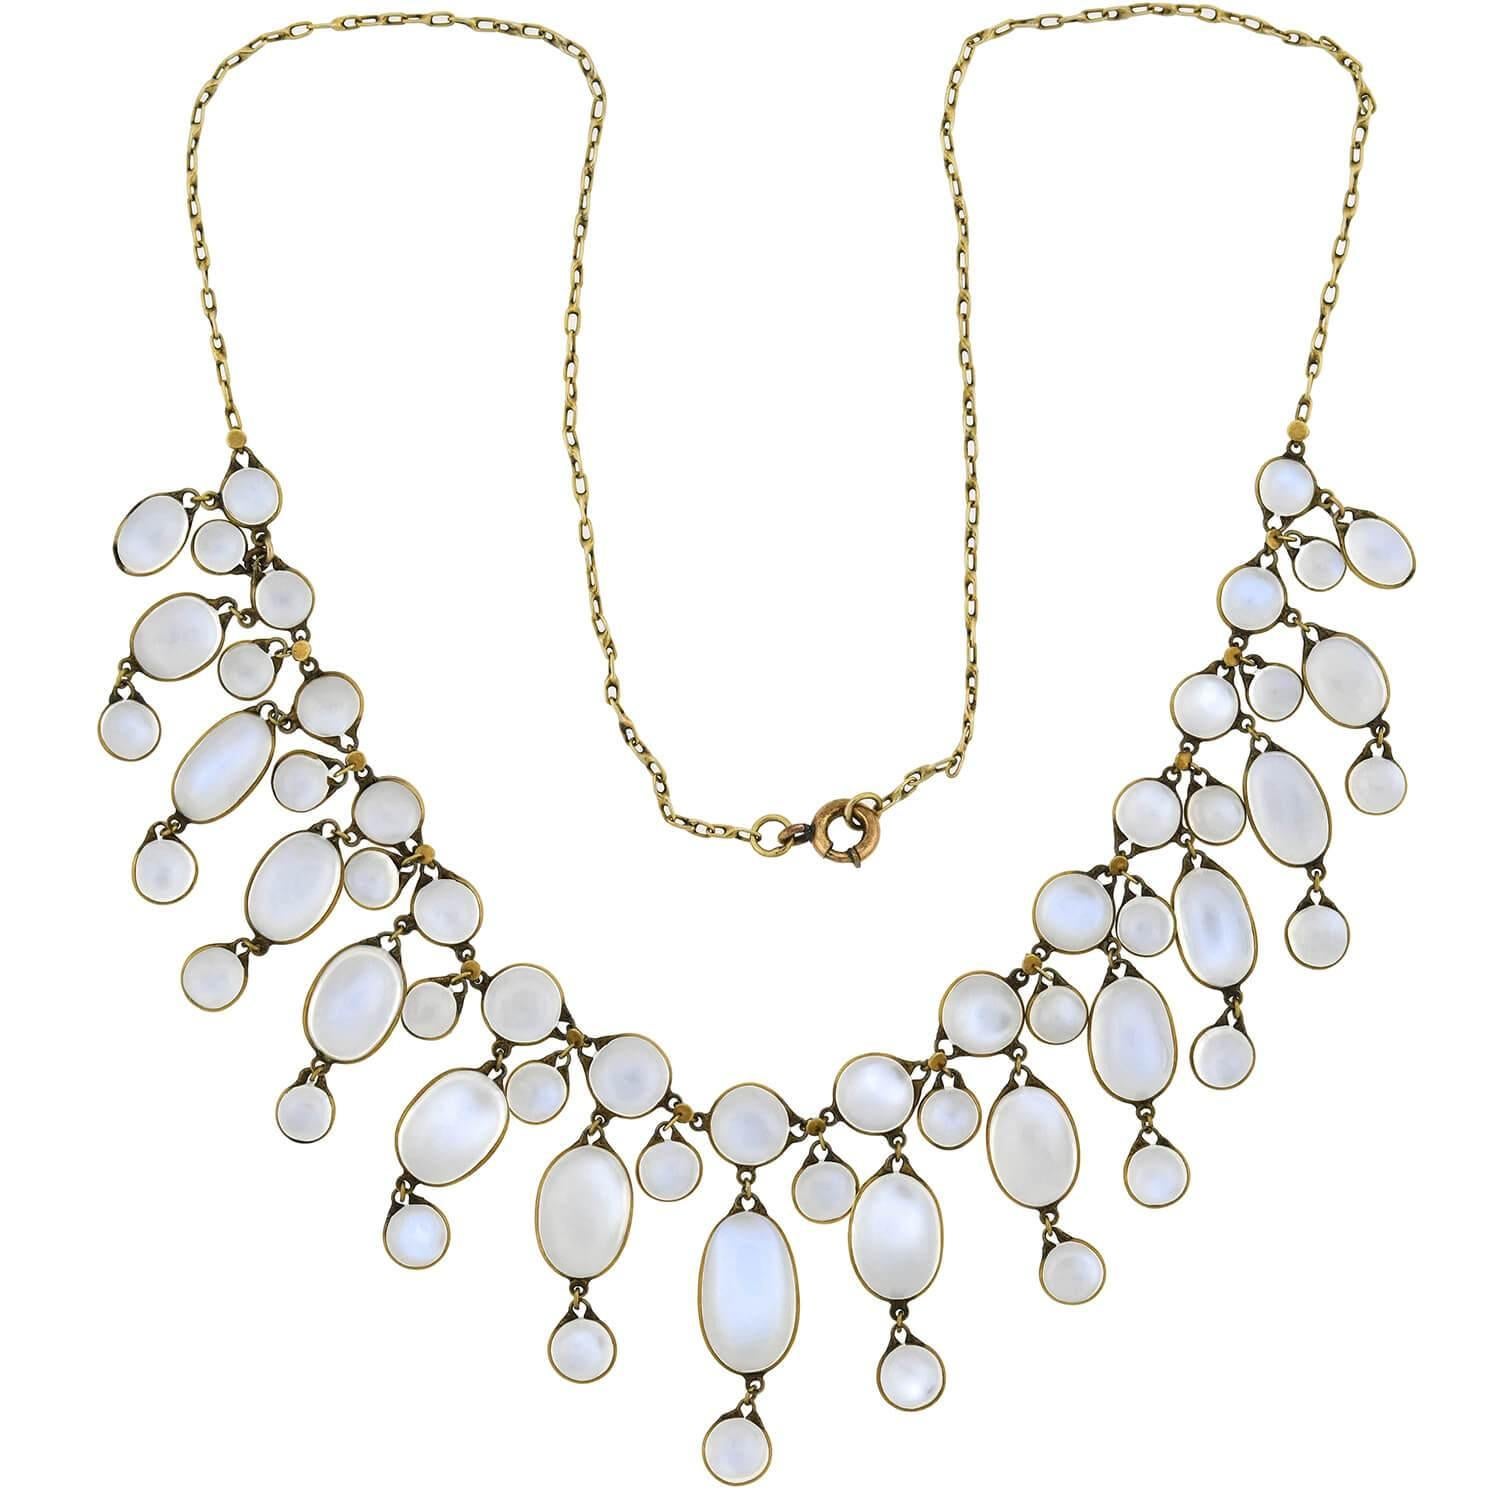 A stunning moonstone necklace from the Art Nouveau (ca1900s) era! This gorgeous piece is comprised of a multitude of moonstone links, which hang in a festoon style from a 14kt gold chain. Included in the design are a combination of round and oval